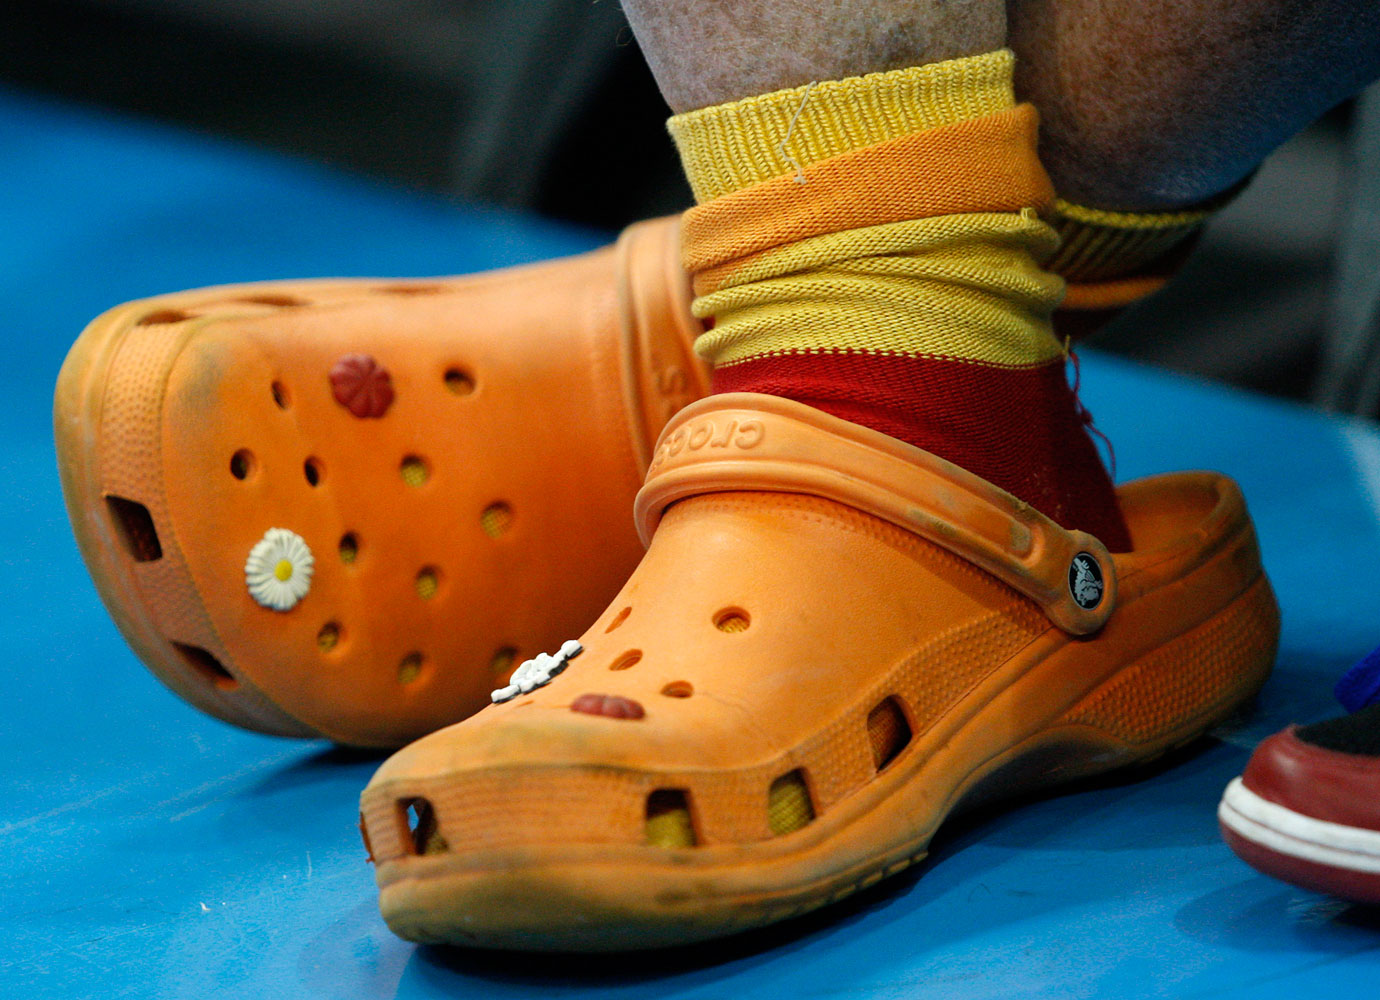 Batali dons dusty, decorated Crocs shoes while watching an NBA basketball game in New Orleans.